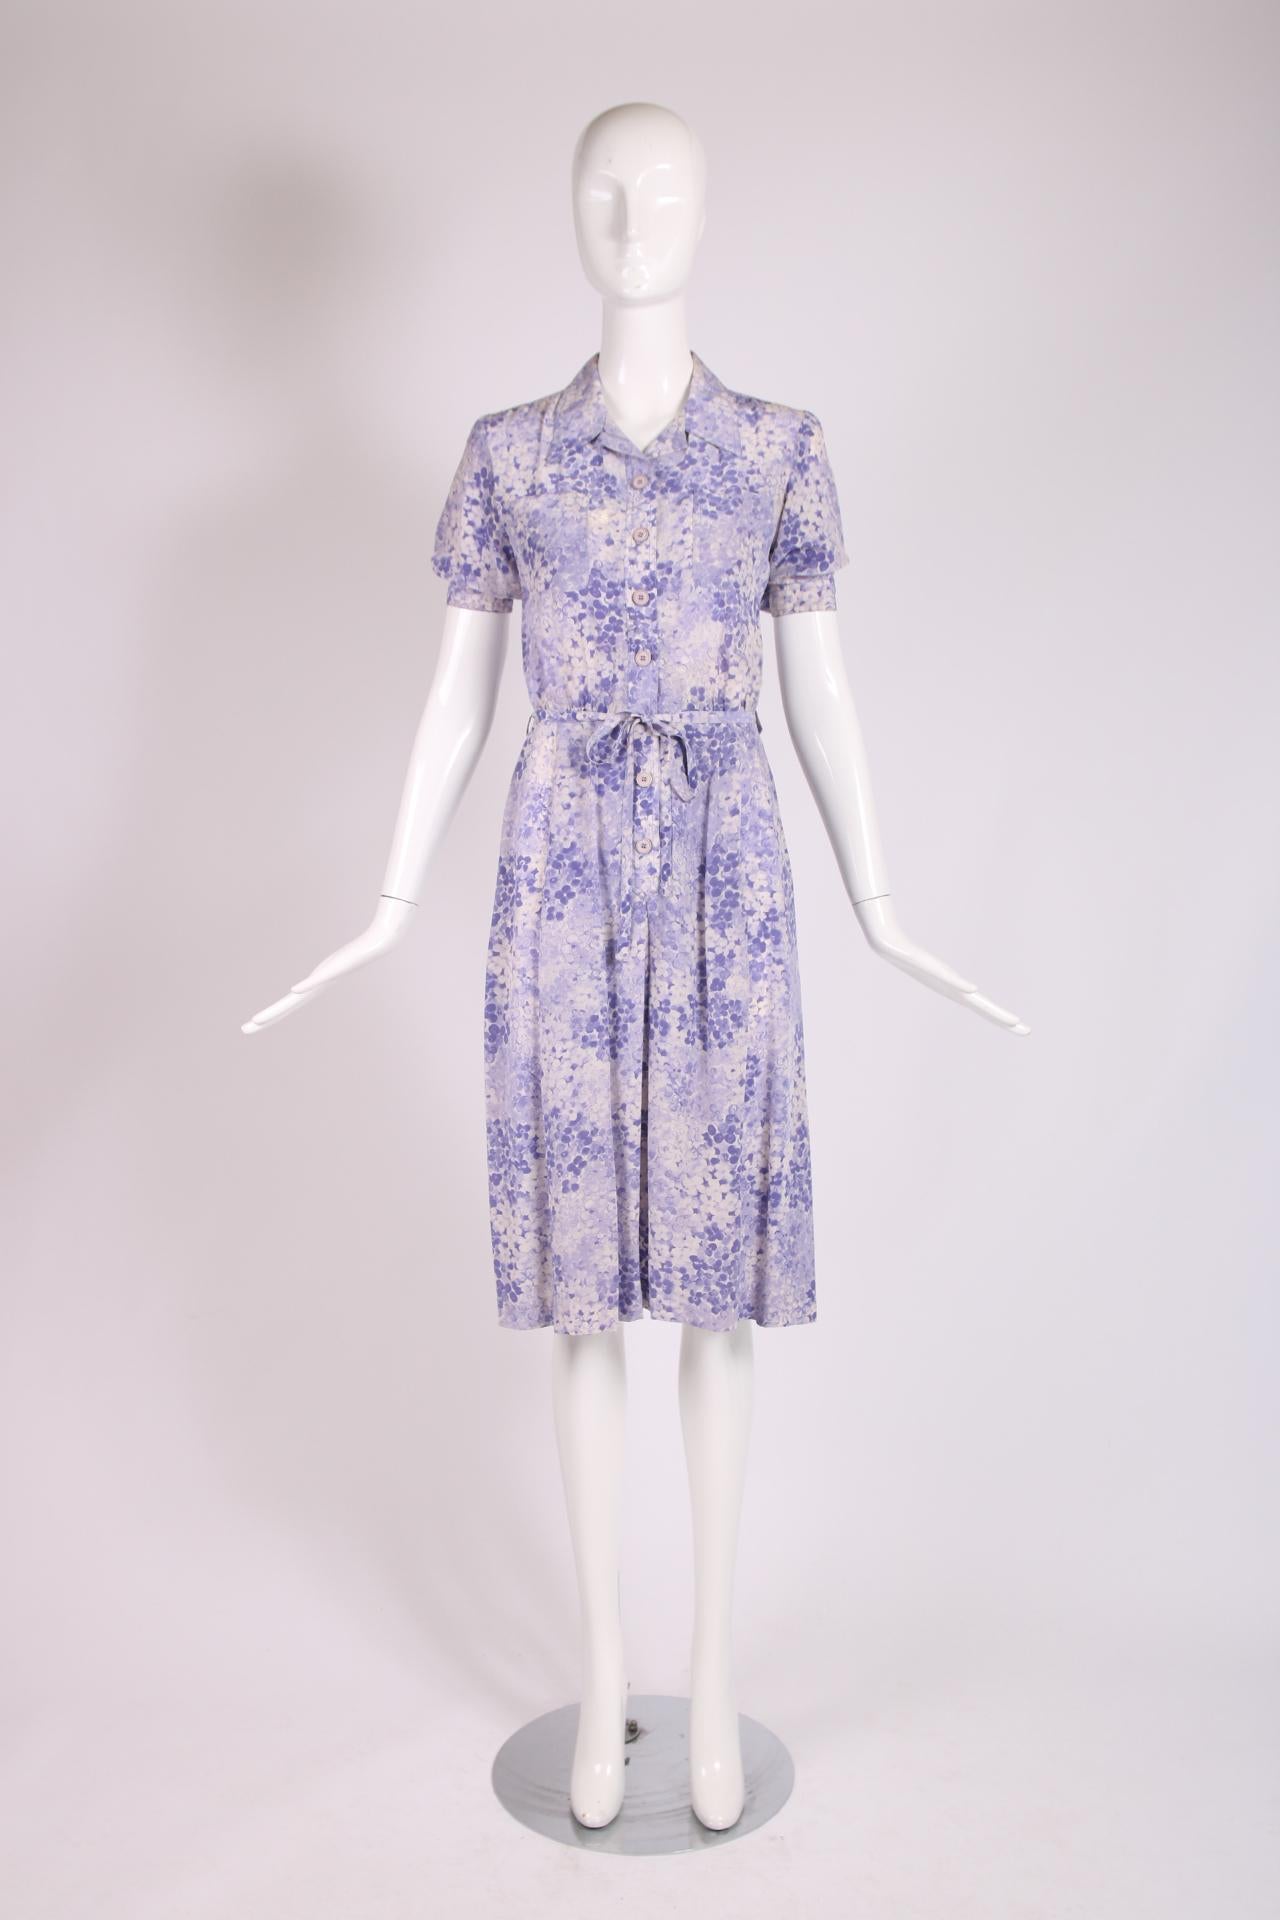 Yves Saint Laurent Purple Floral Silk Day Dress 1970's In Good Condition For Sale In Studio City, CA